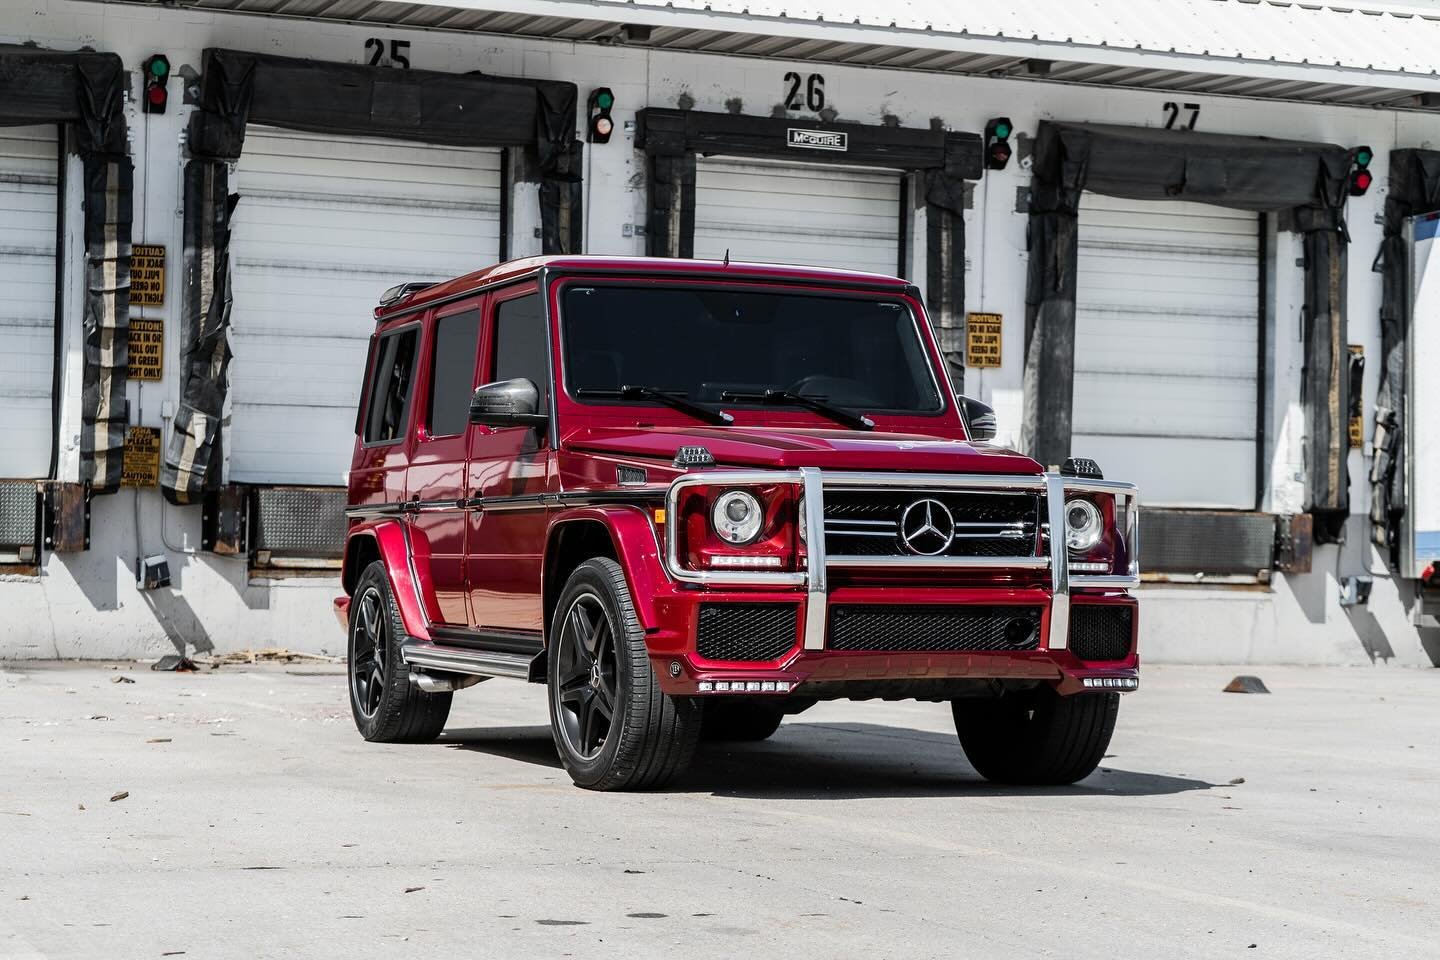 Mercedes G63 AMG in for a premium @suntekfilms tint job along with a rear carbon spoiler installation. Congrats on the new ride @grigmusic / @violet.rowell 😎 

#GPCustoms #GPC #1STPSHP #mercedes #gwagon #g63 #g63amg